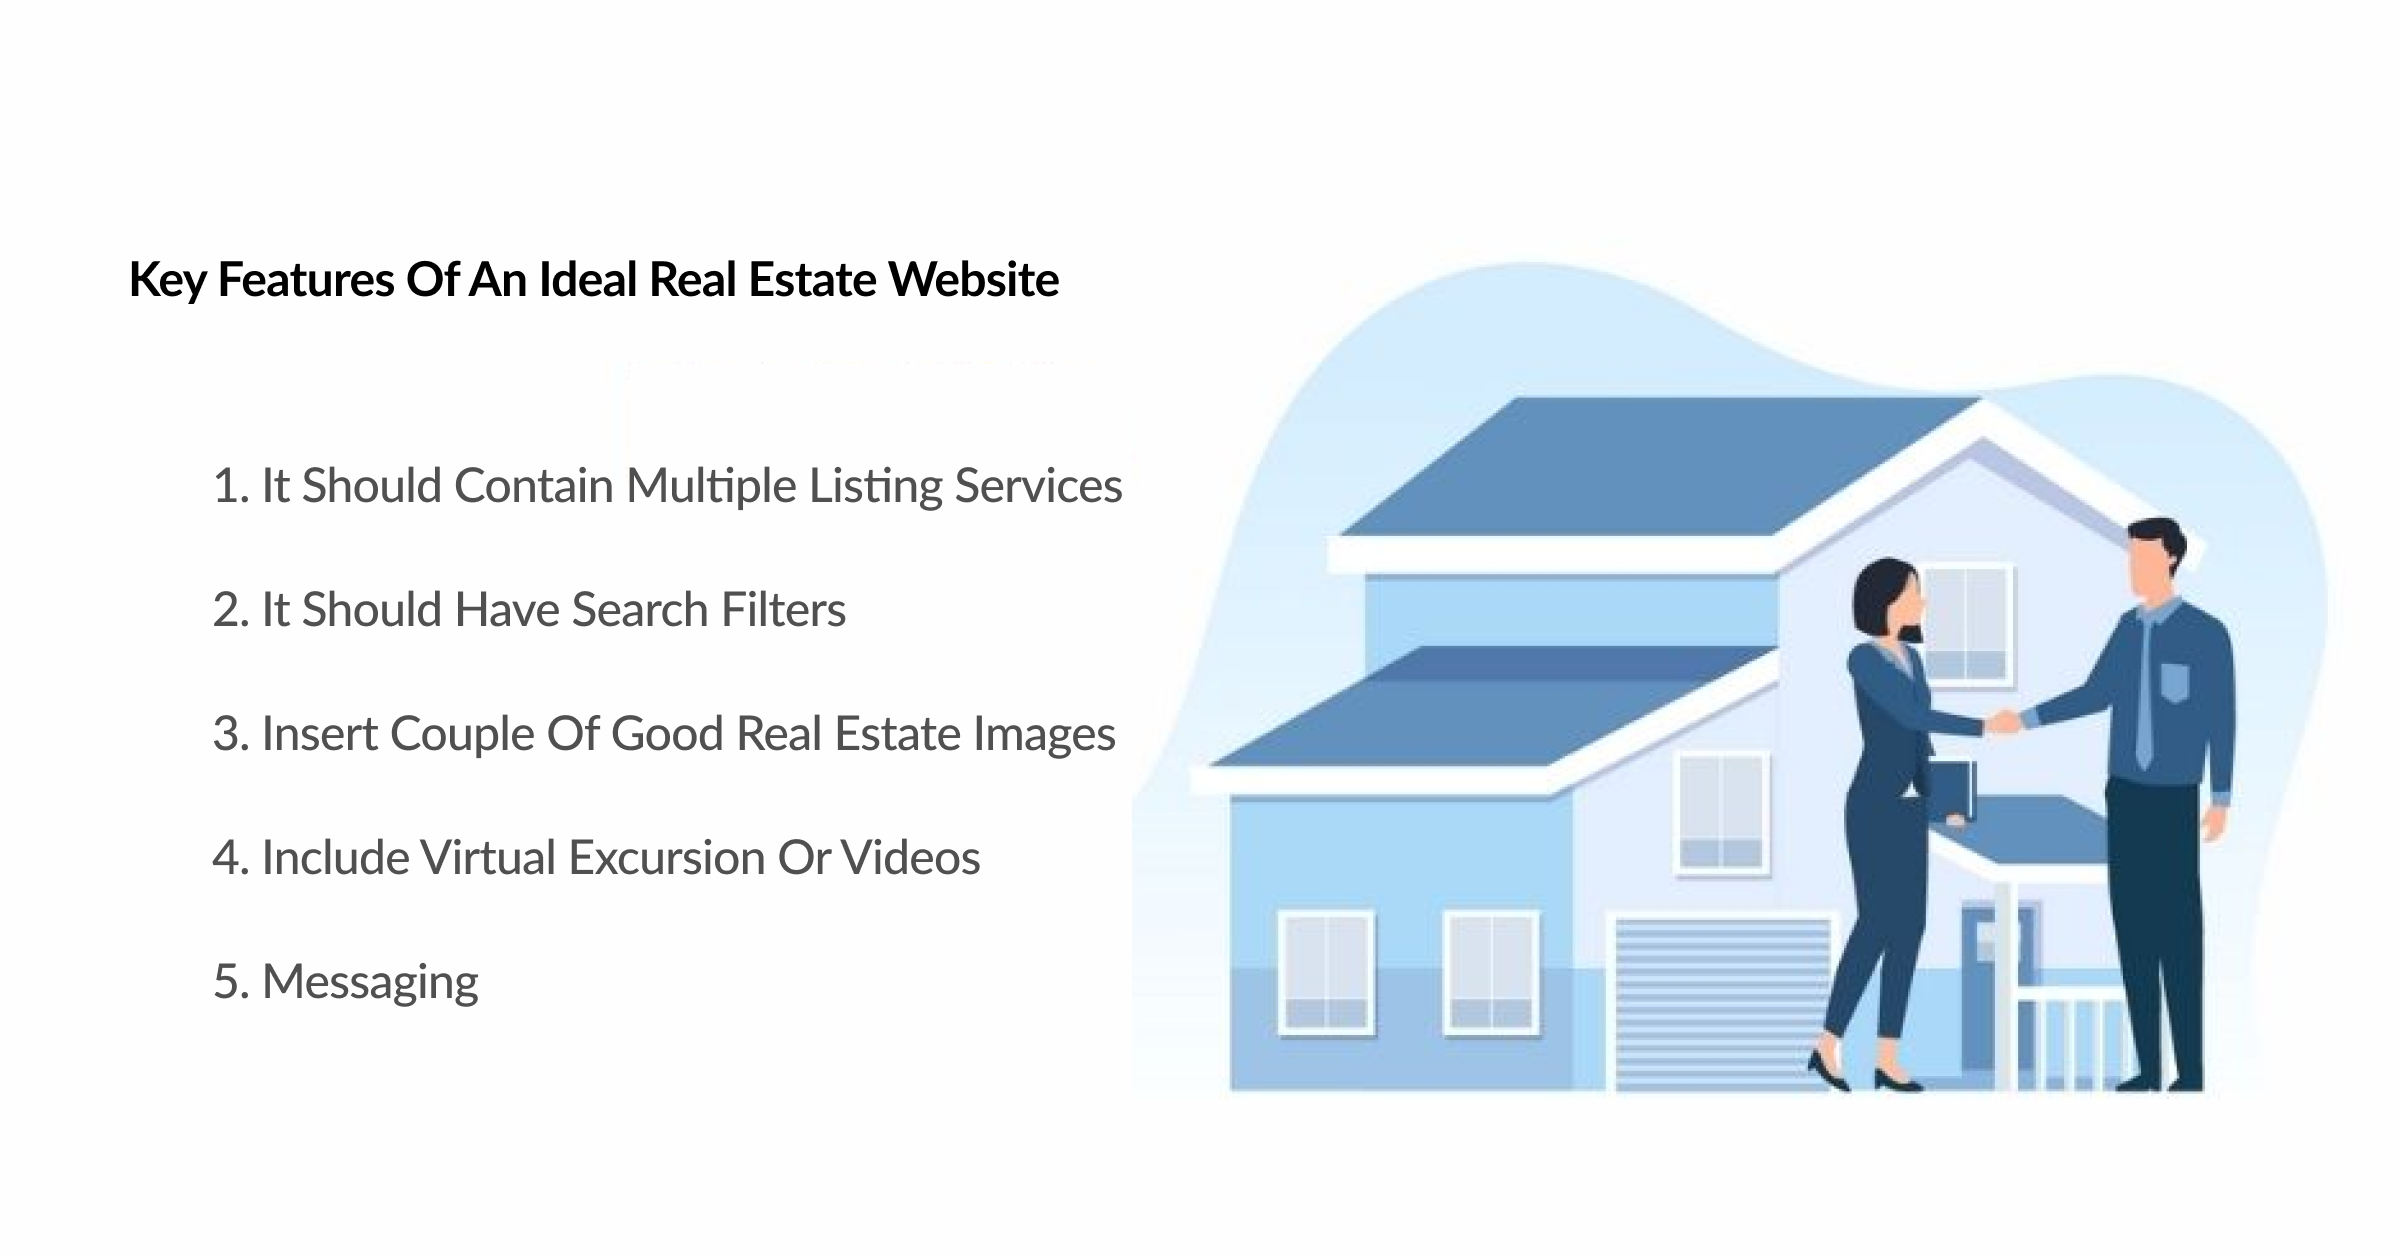 Key Features of an Ideal Real Estate Website